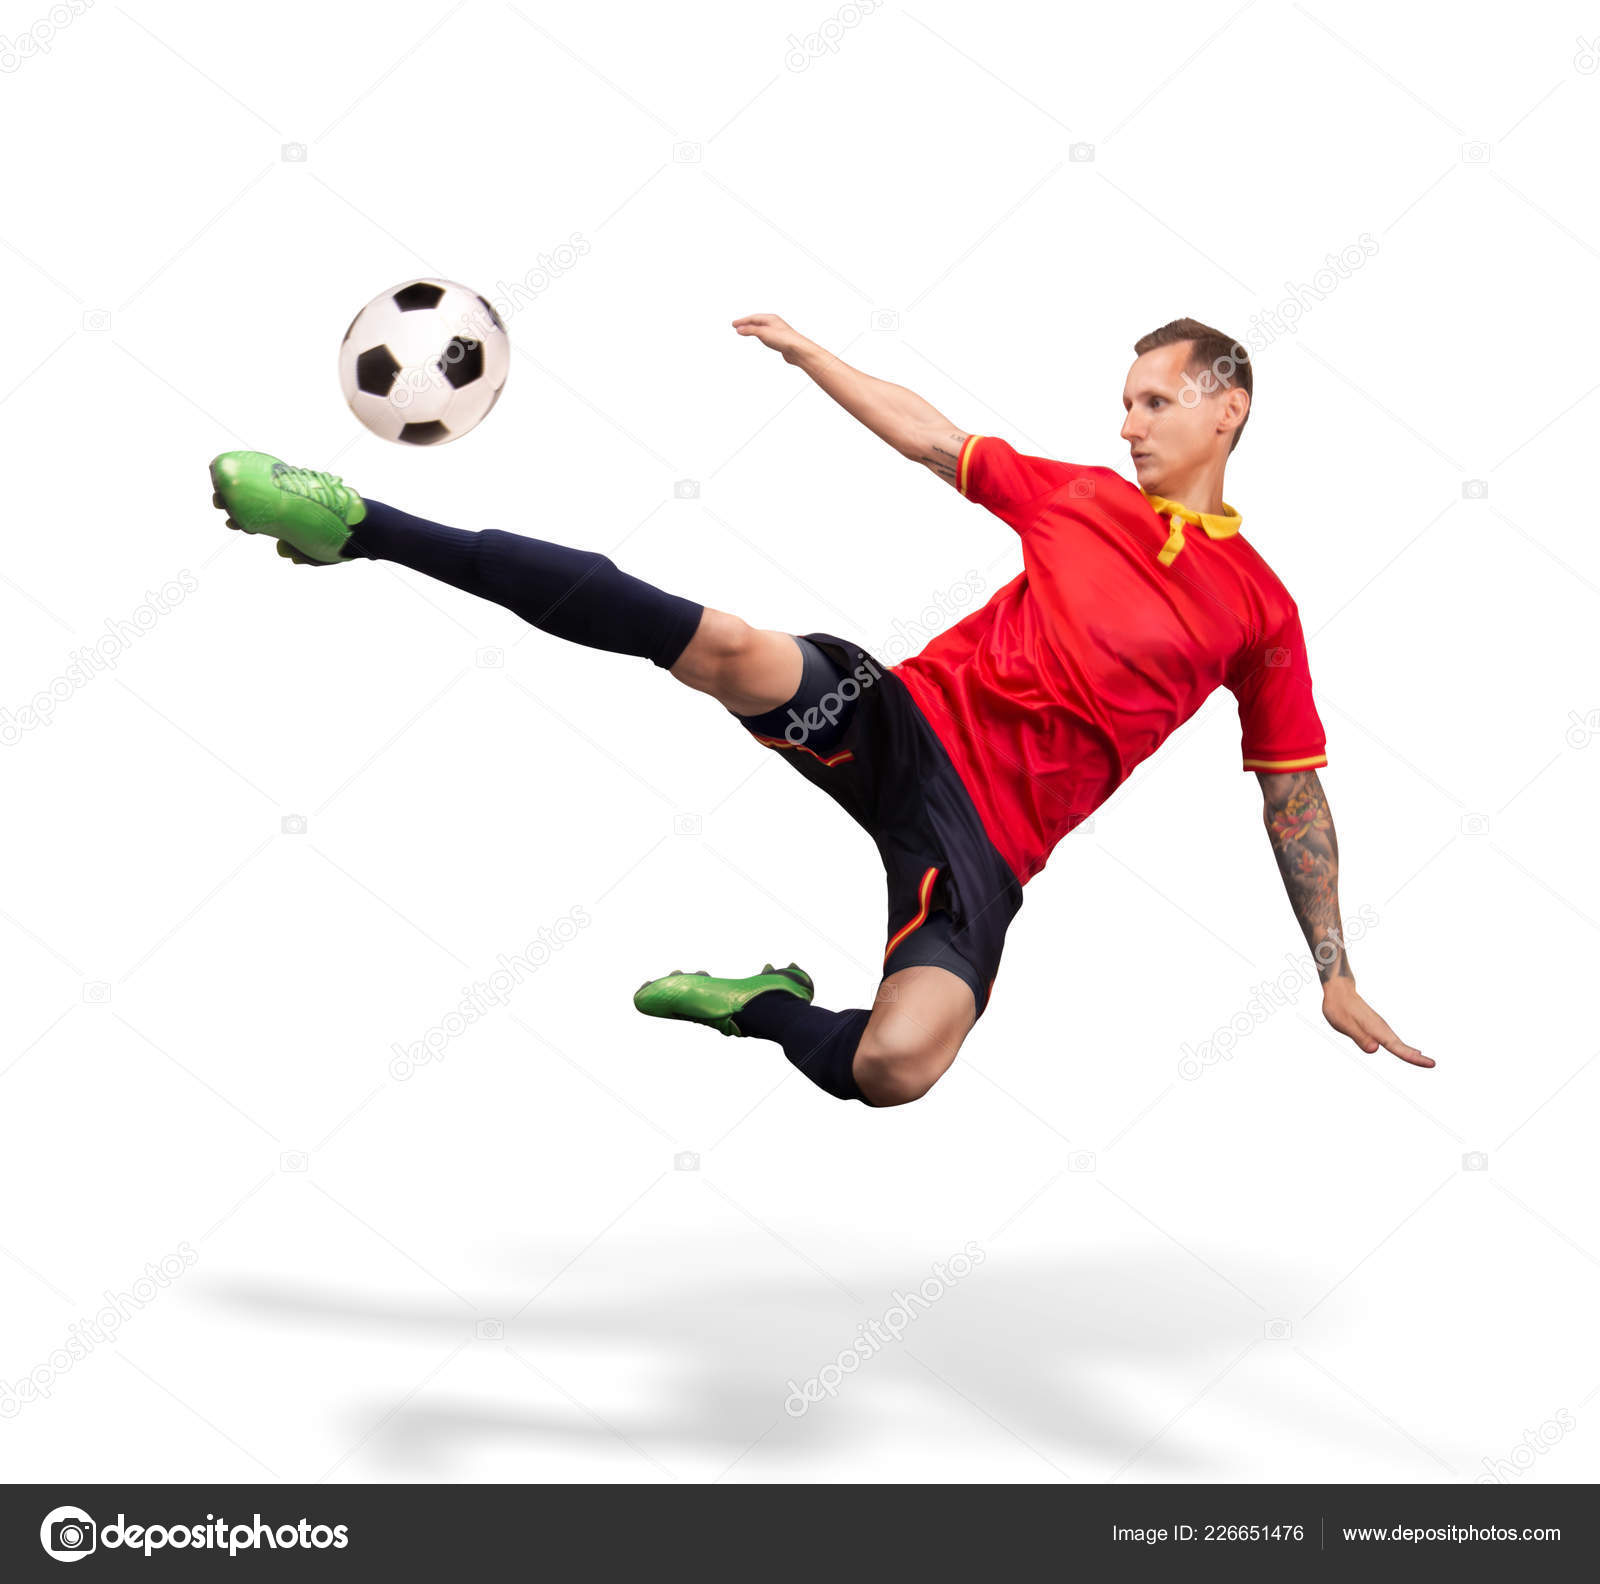 Head Soccer 6.18 Free Download